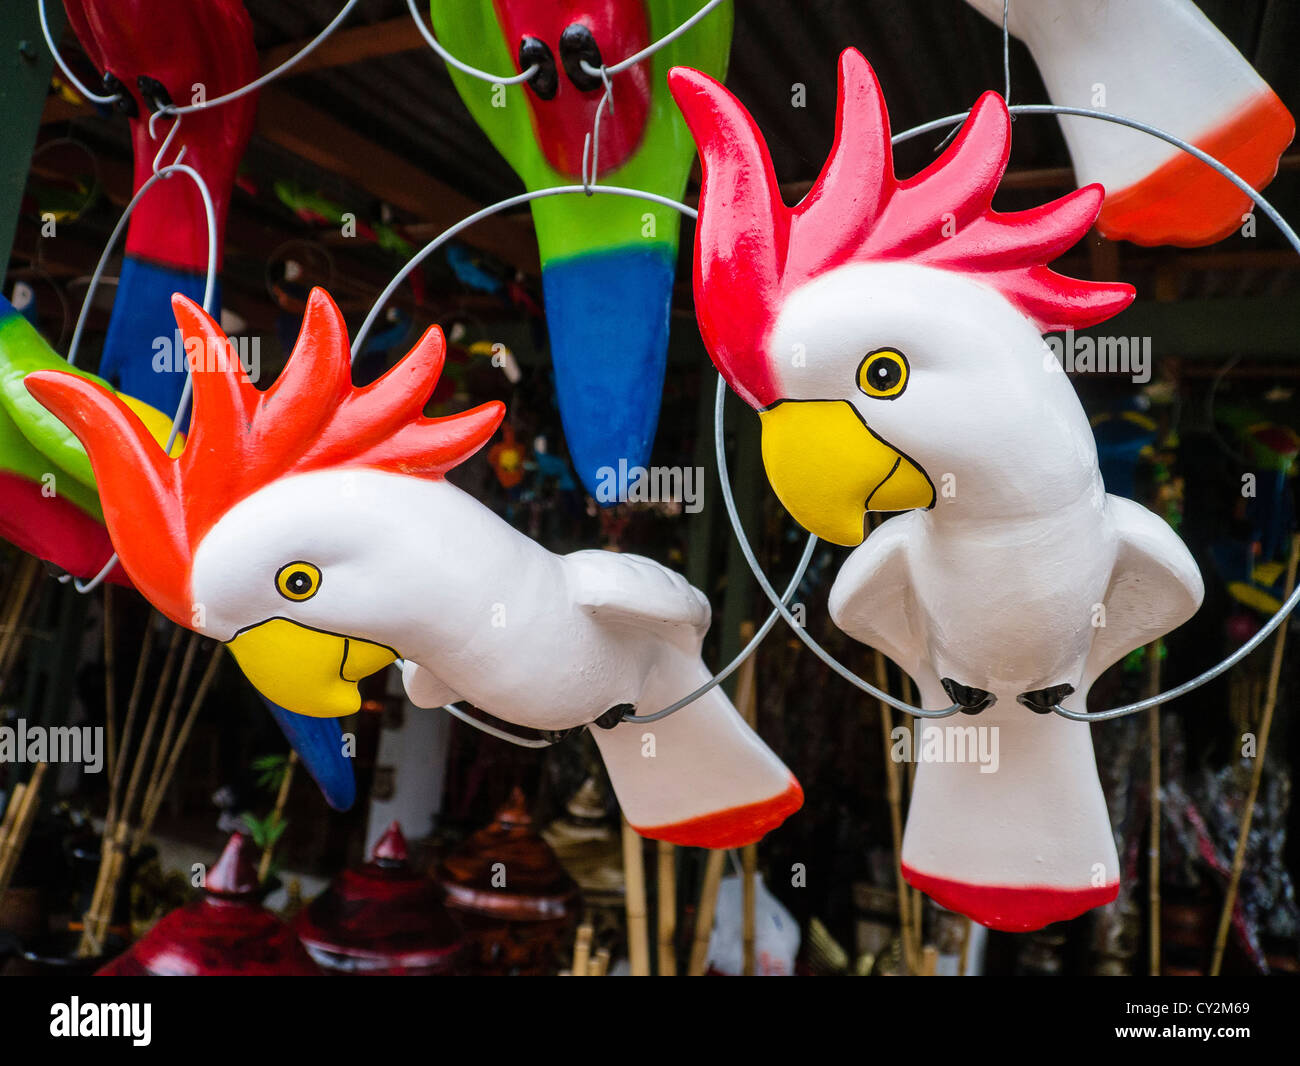 Kitsch lawn art for sale in the form of two cockatoos at a street market in Asunción Paraguay. Stock Photo